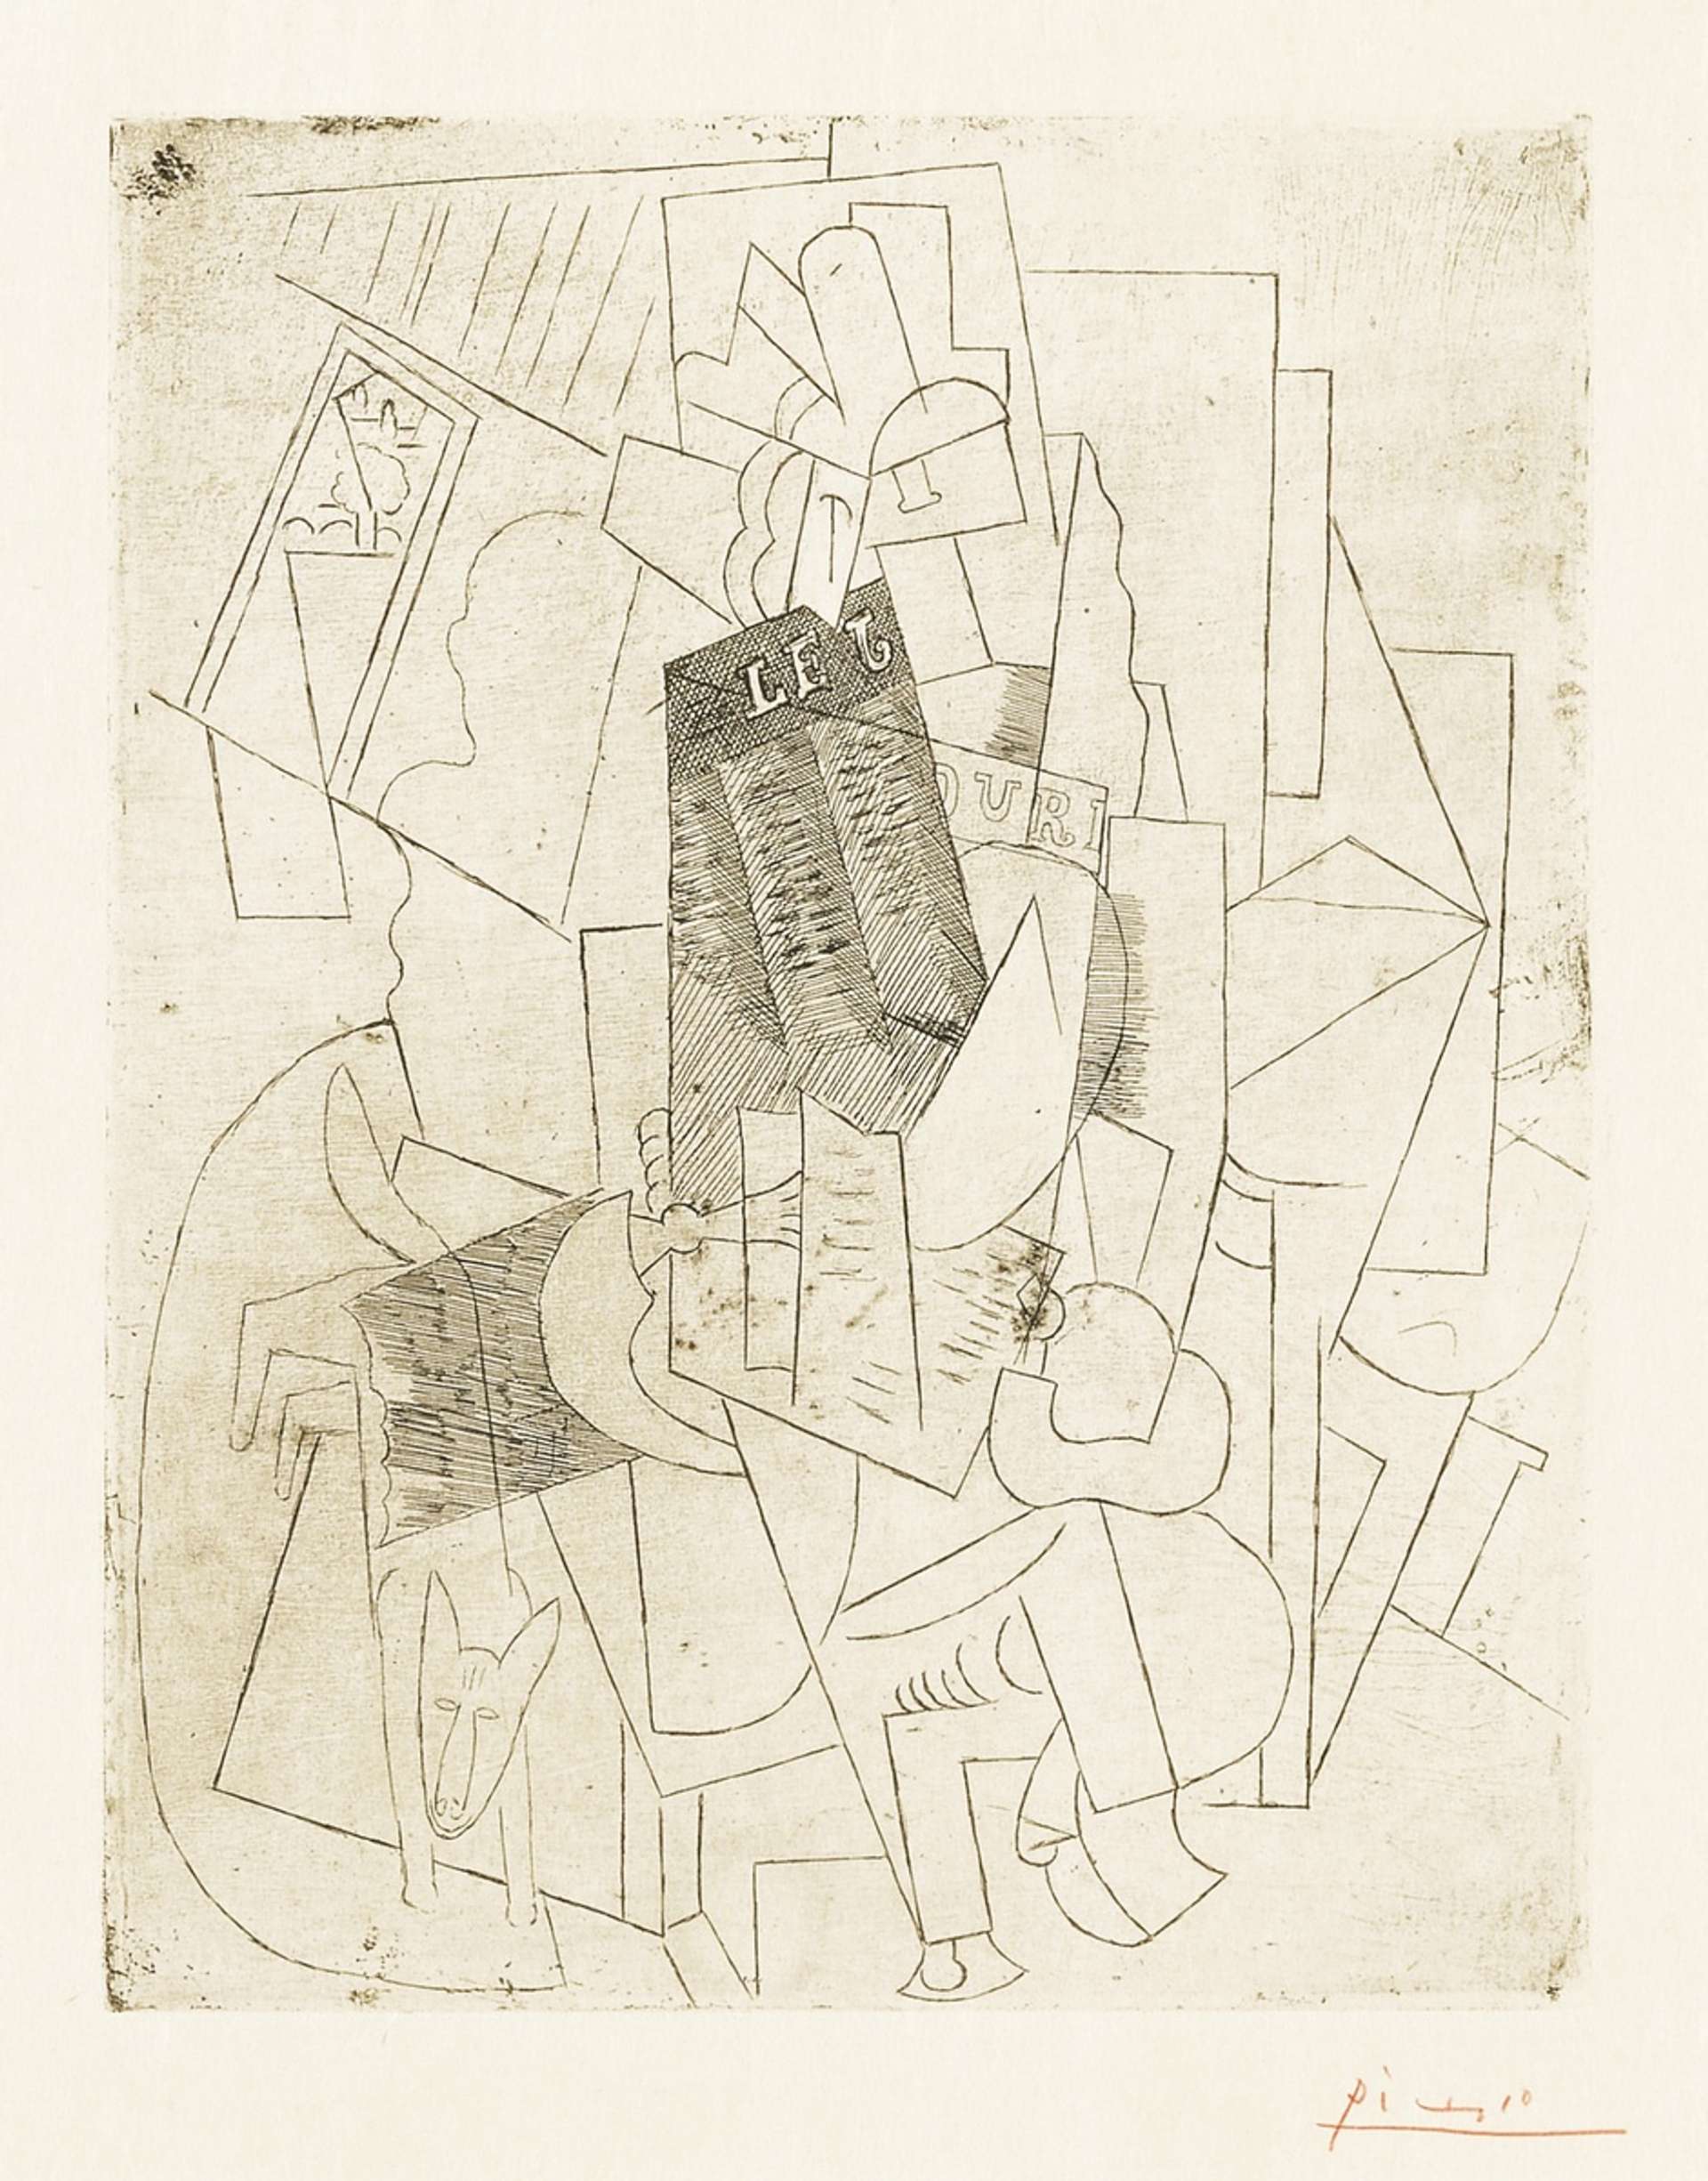 An image of an artwork by Pablo Picasso, depicting a man reading a newspaper with a dog by his side. The work is depicted in Picasso's cubist style and in fine lines.